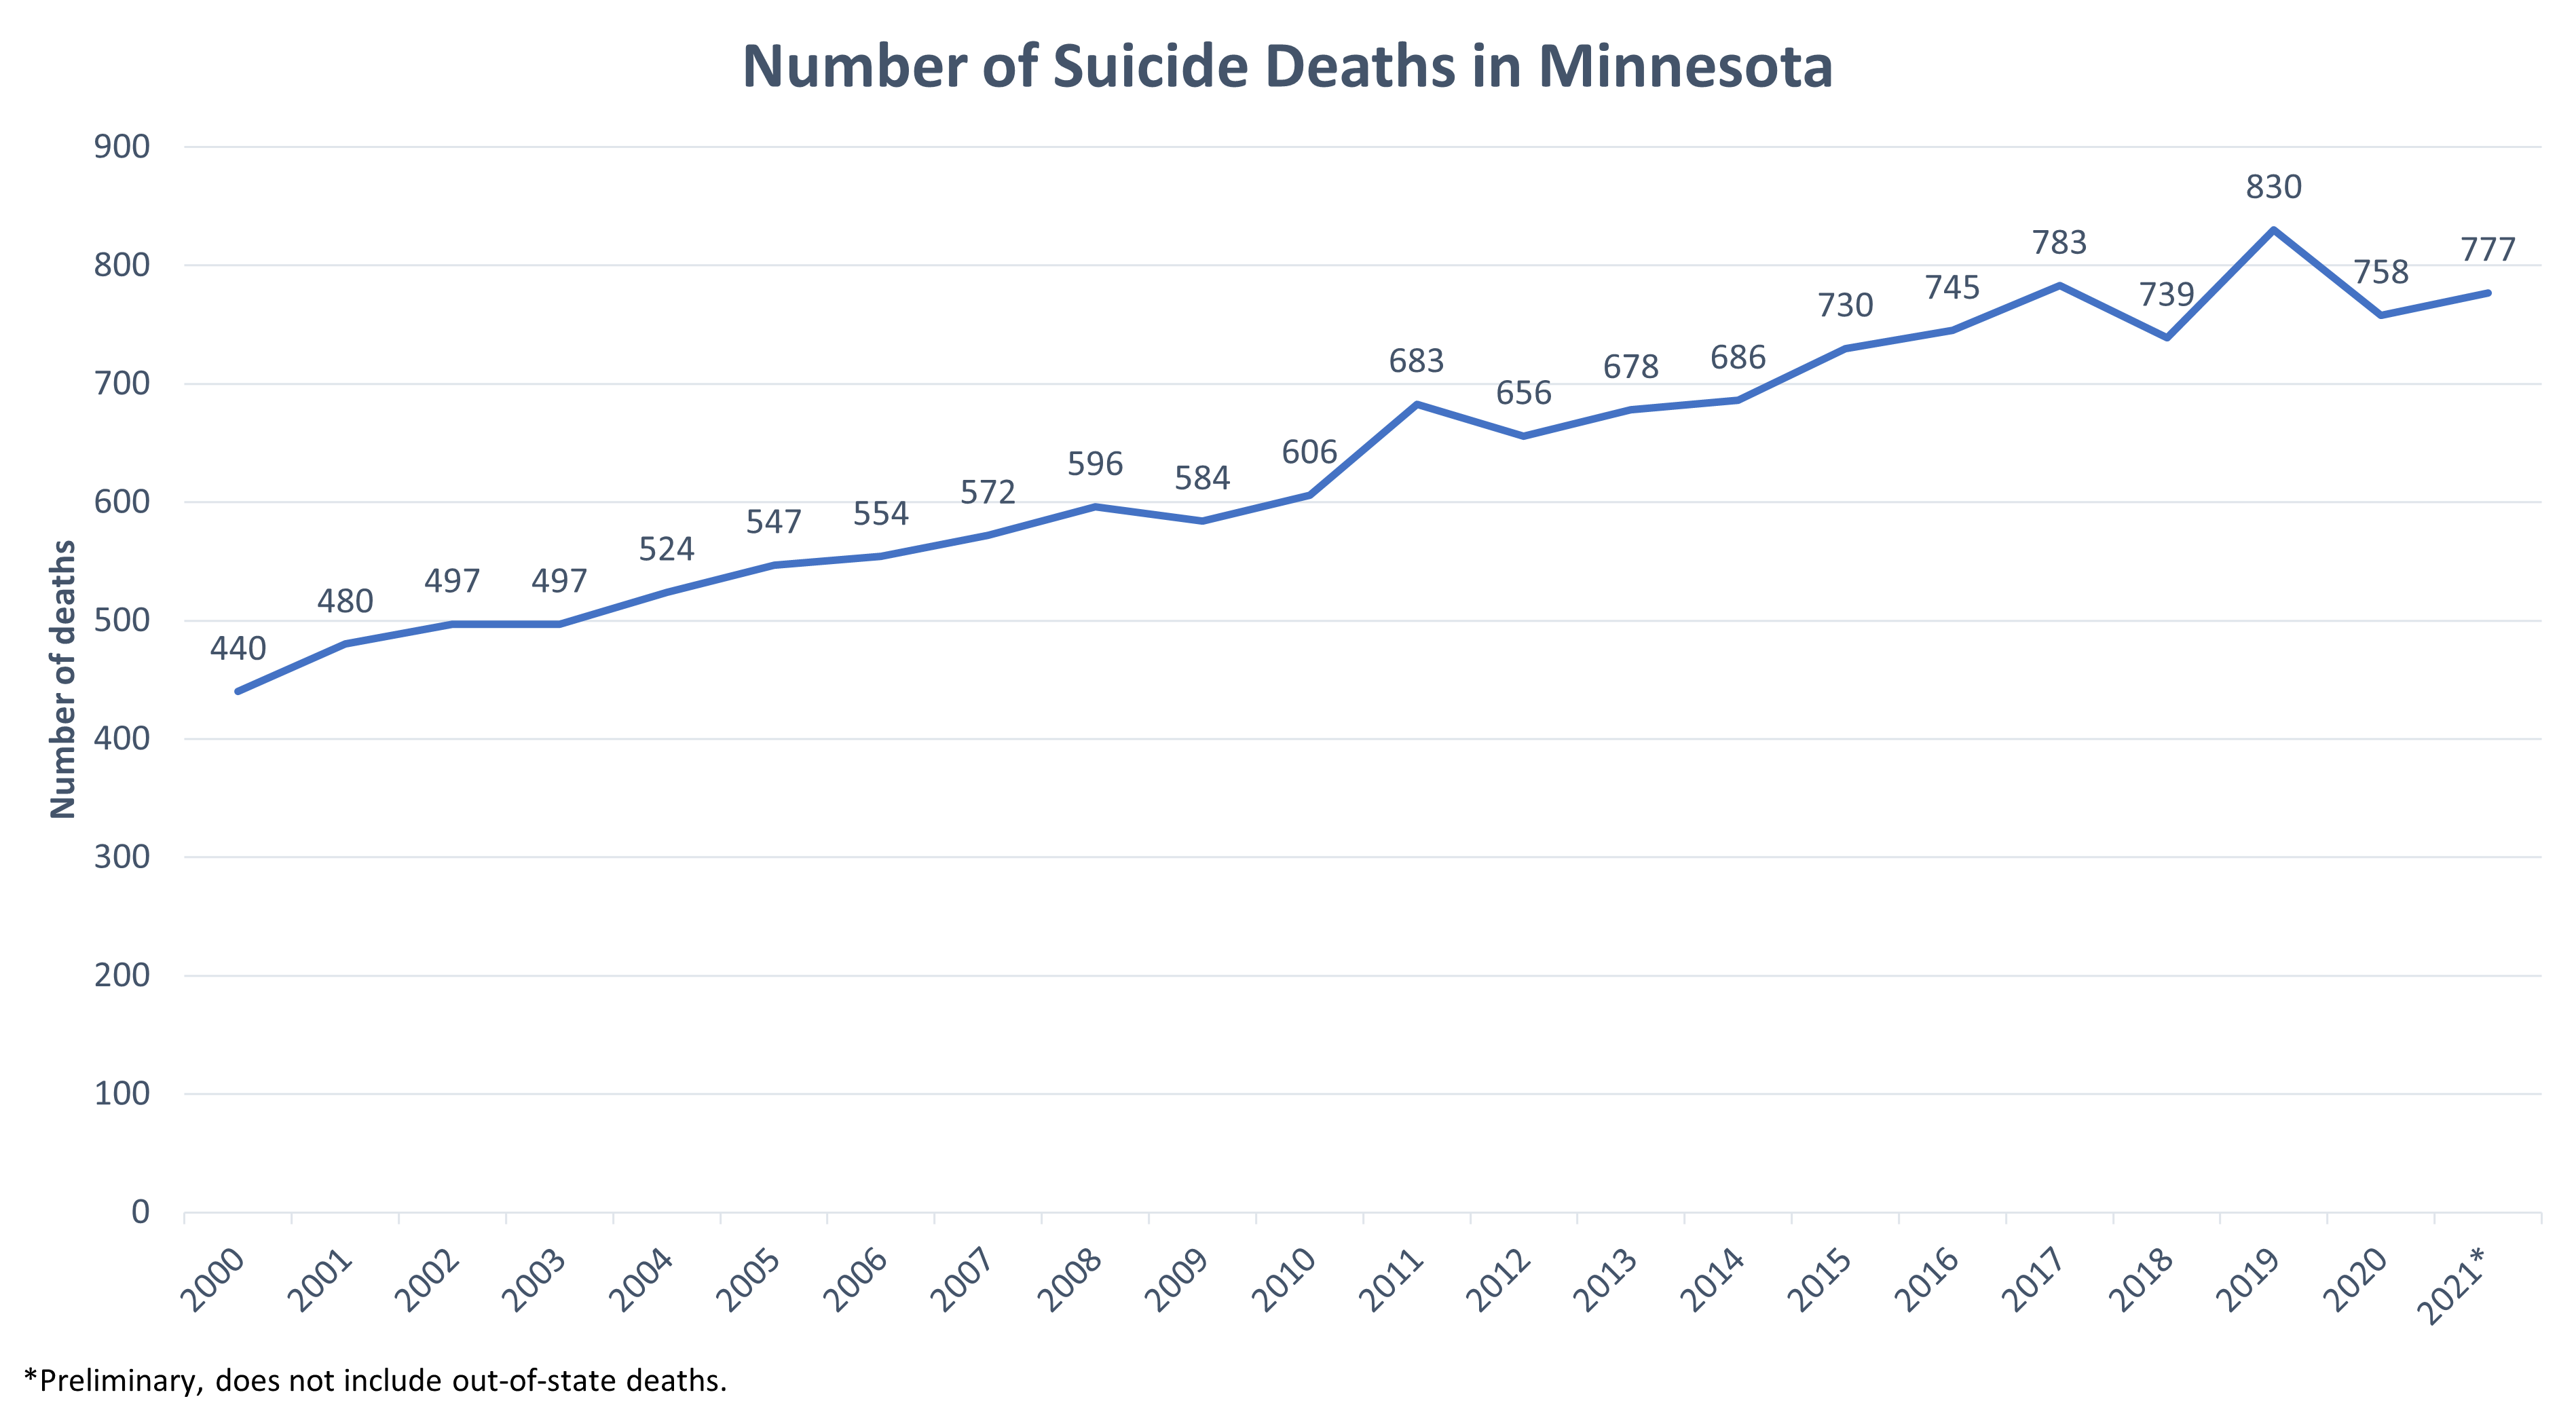 Number of suicide deaths in Minnesota by year